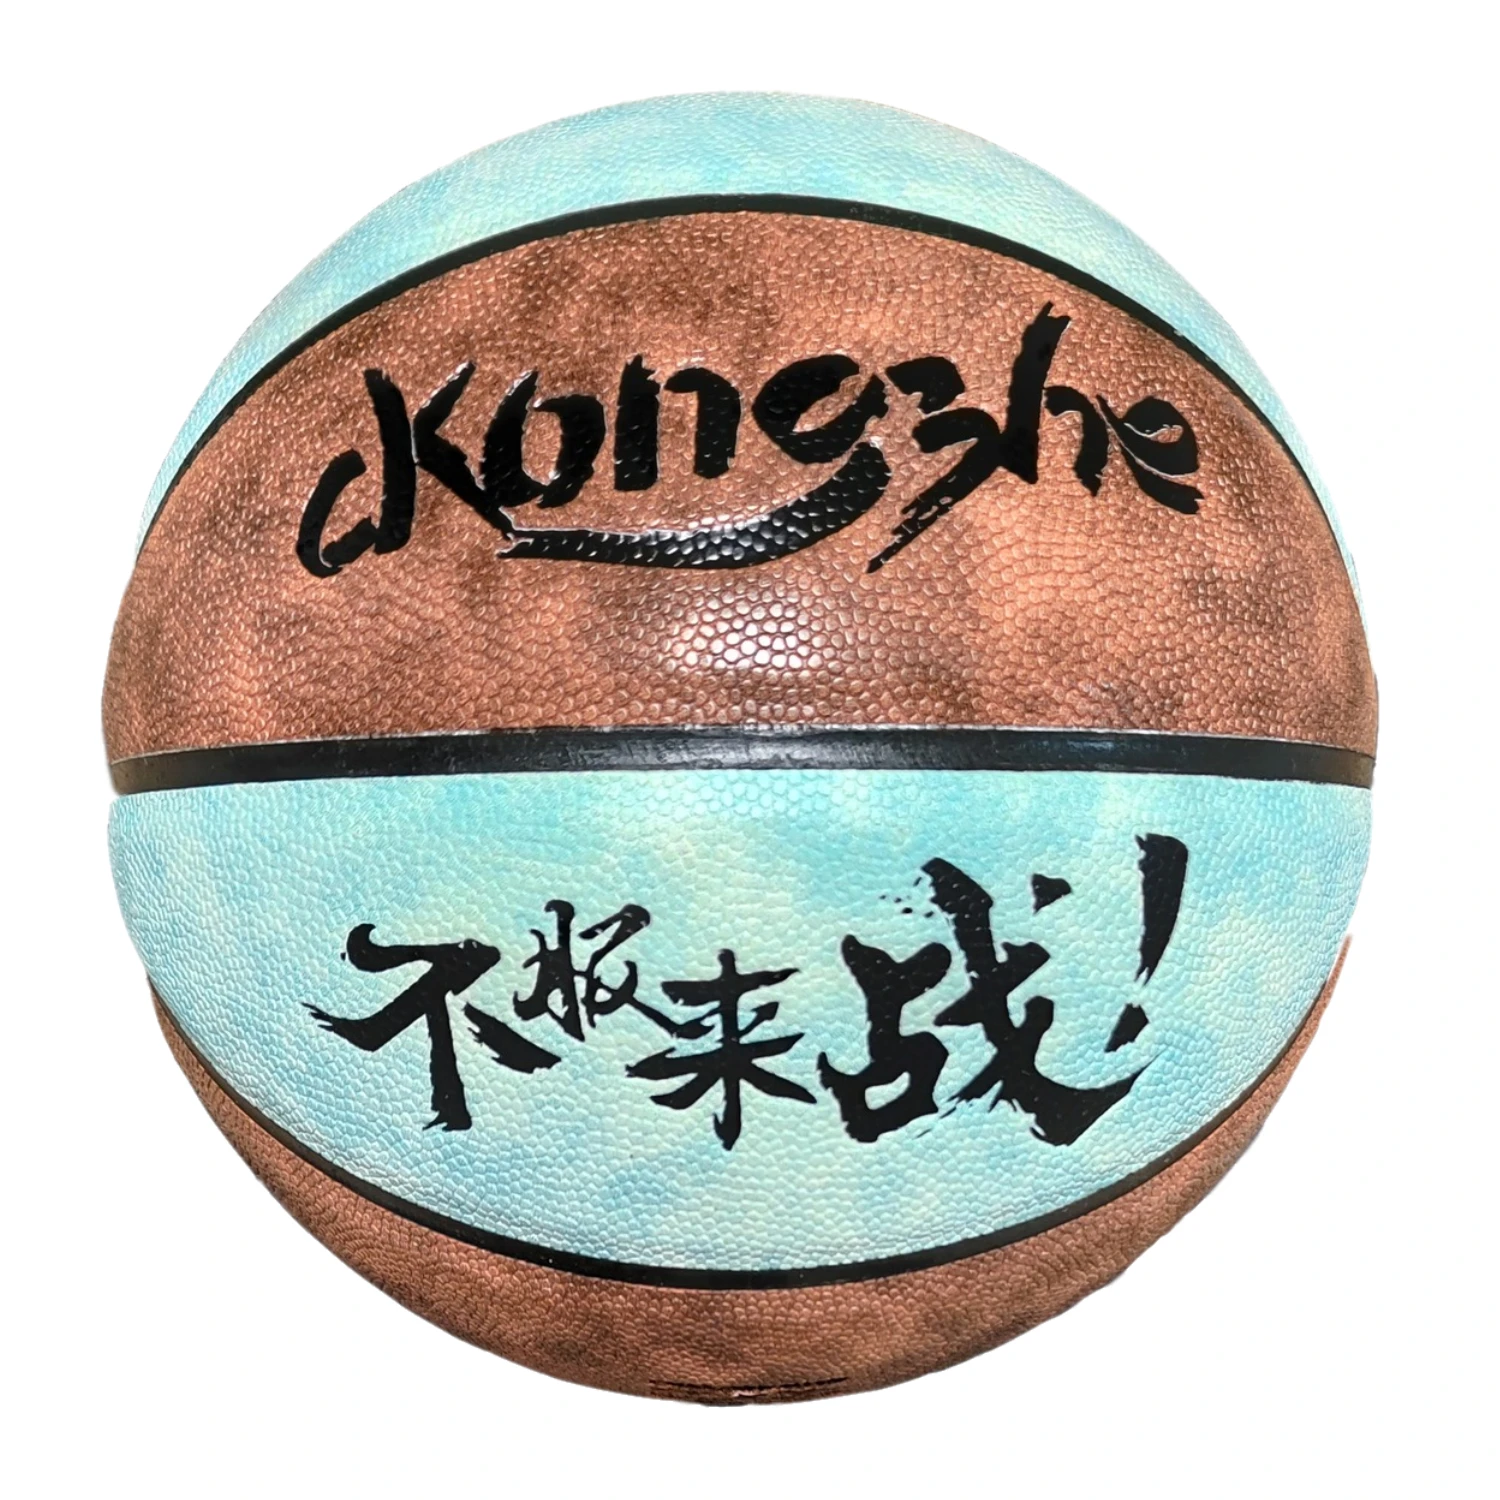 New High Quality Basketball Ball Size 7 Outdoor Indoor Match Training Basketball Free With Net Bag+ Needle Wholesale or Retail